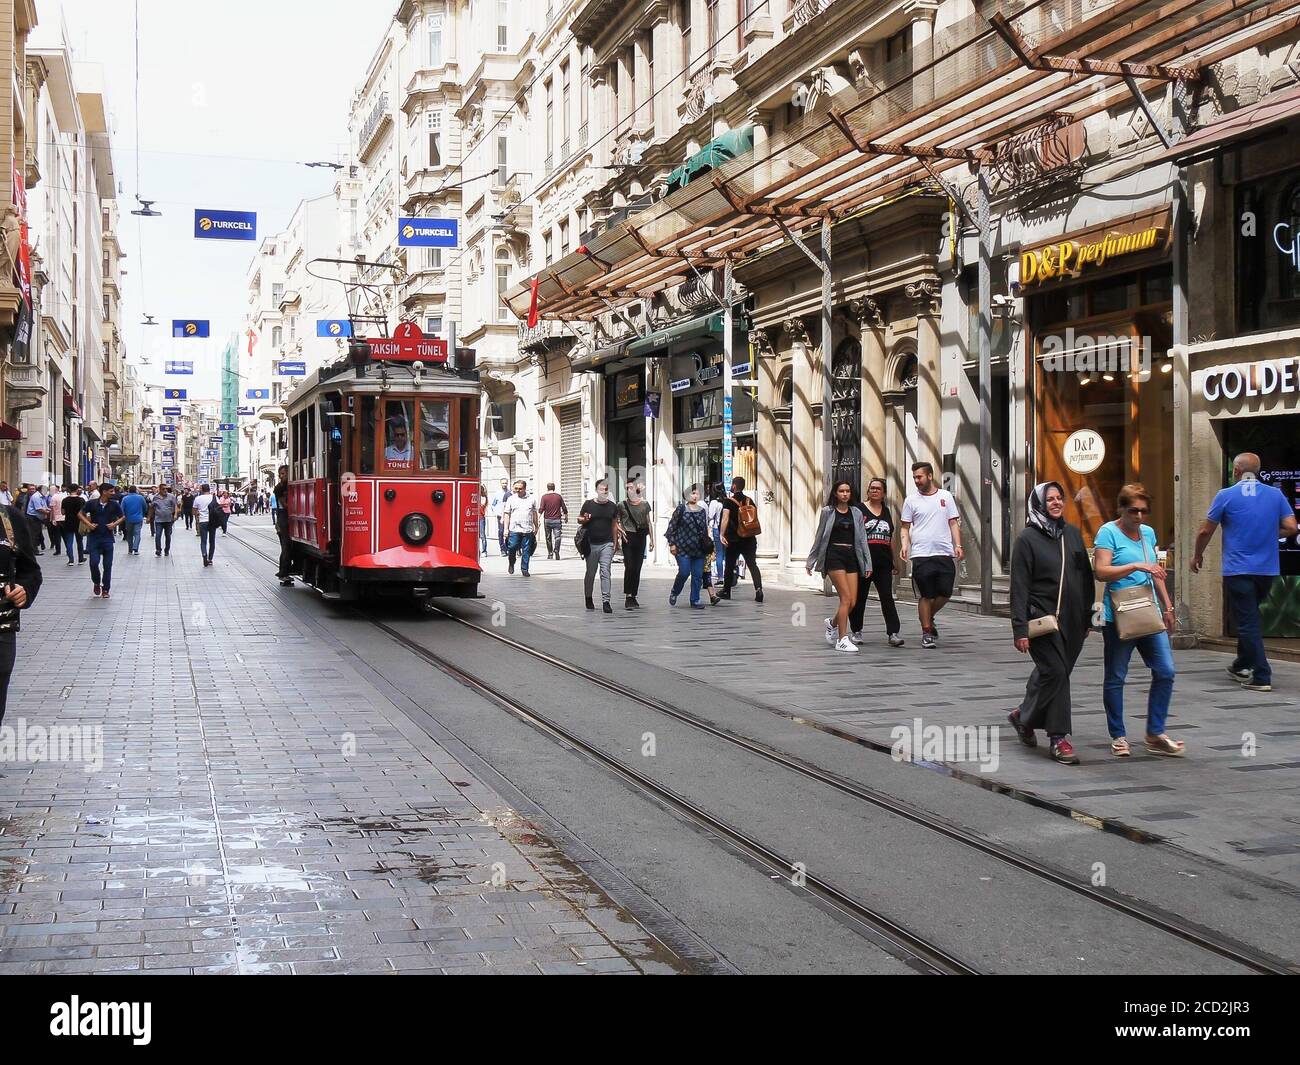 ISTANBUL, TURKEY - MAY, 22, 2019: the red taksim-tunel tram approaching in istanbul Stock Photo